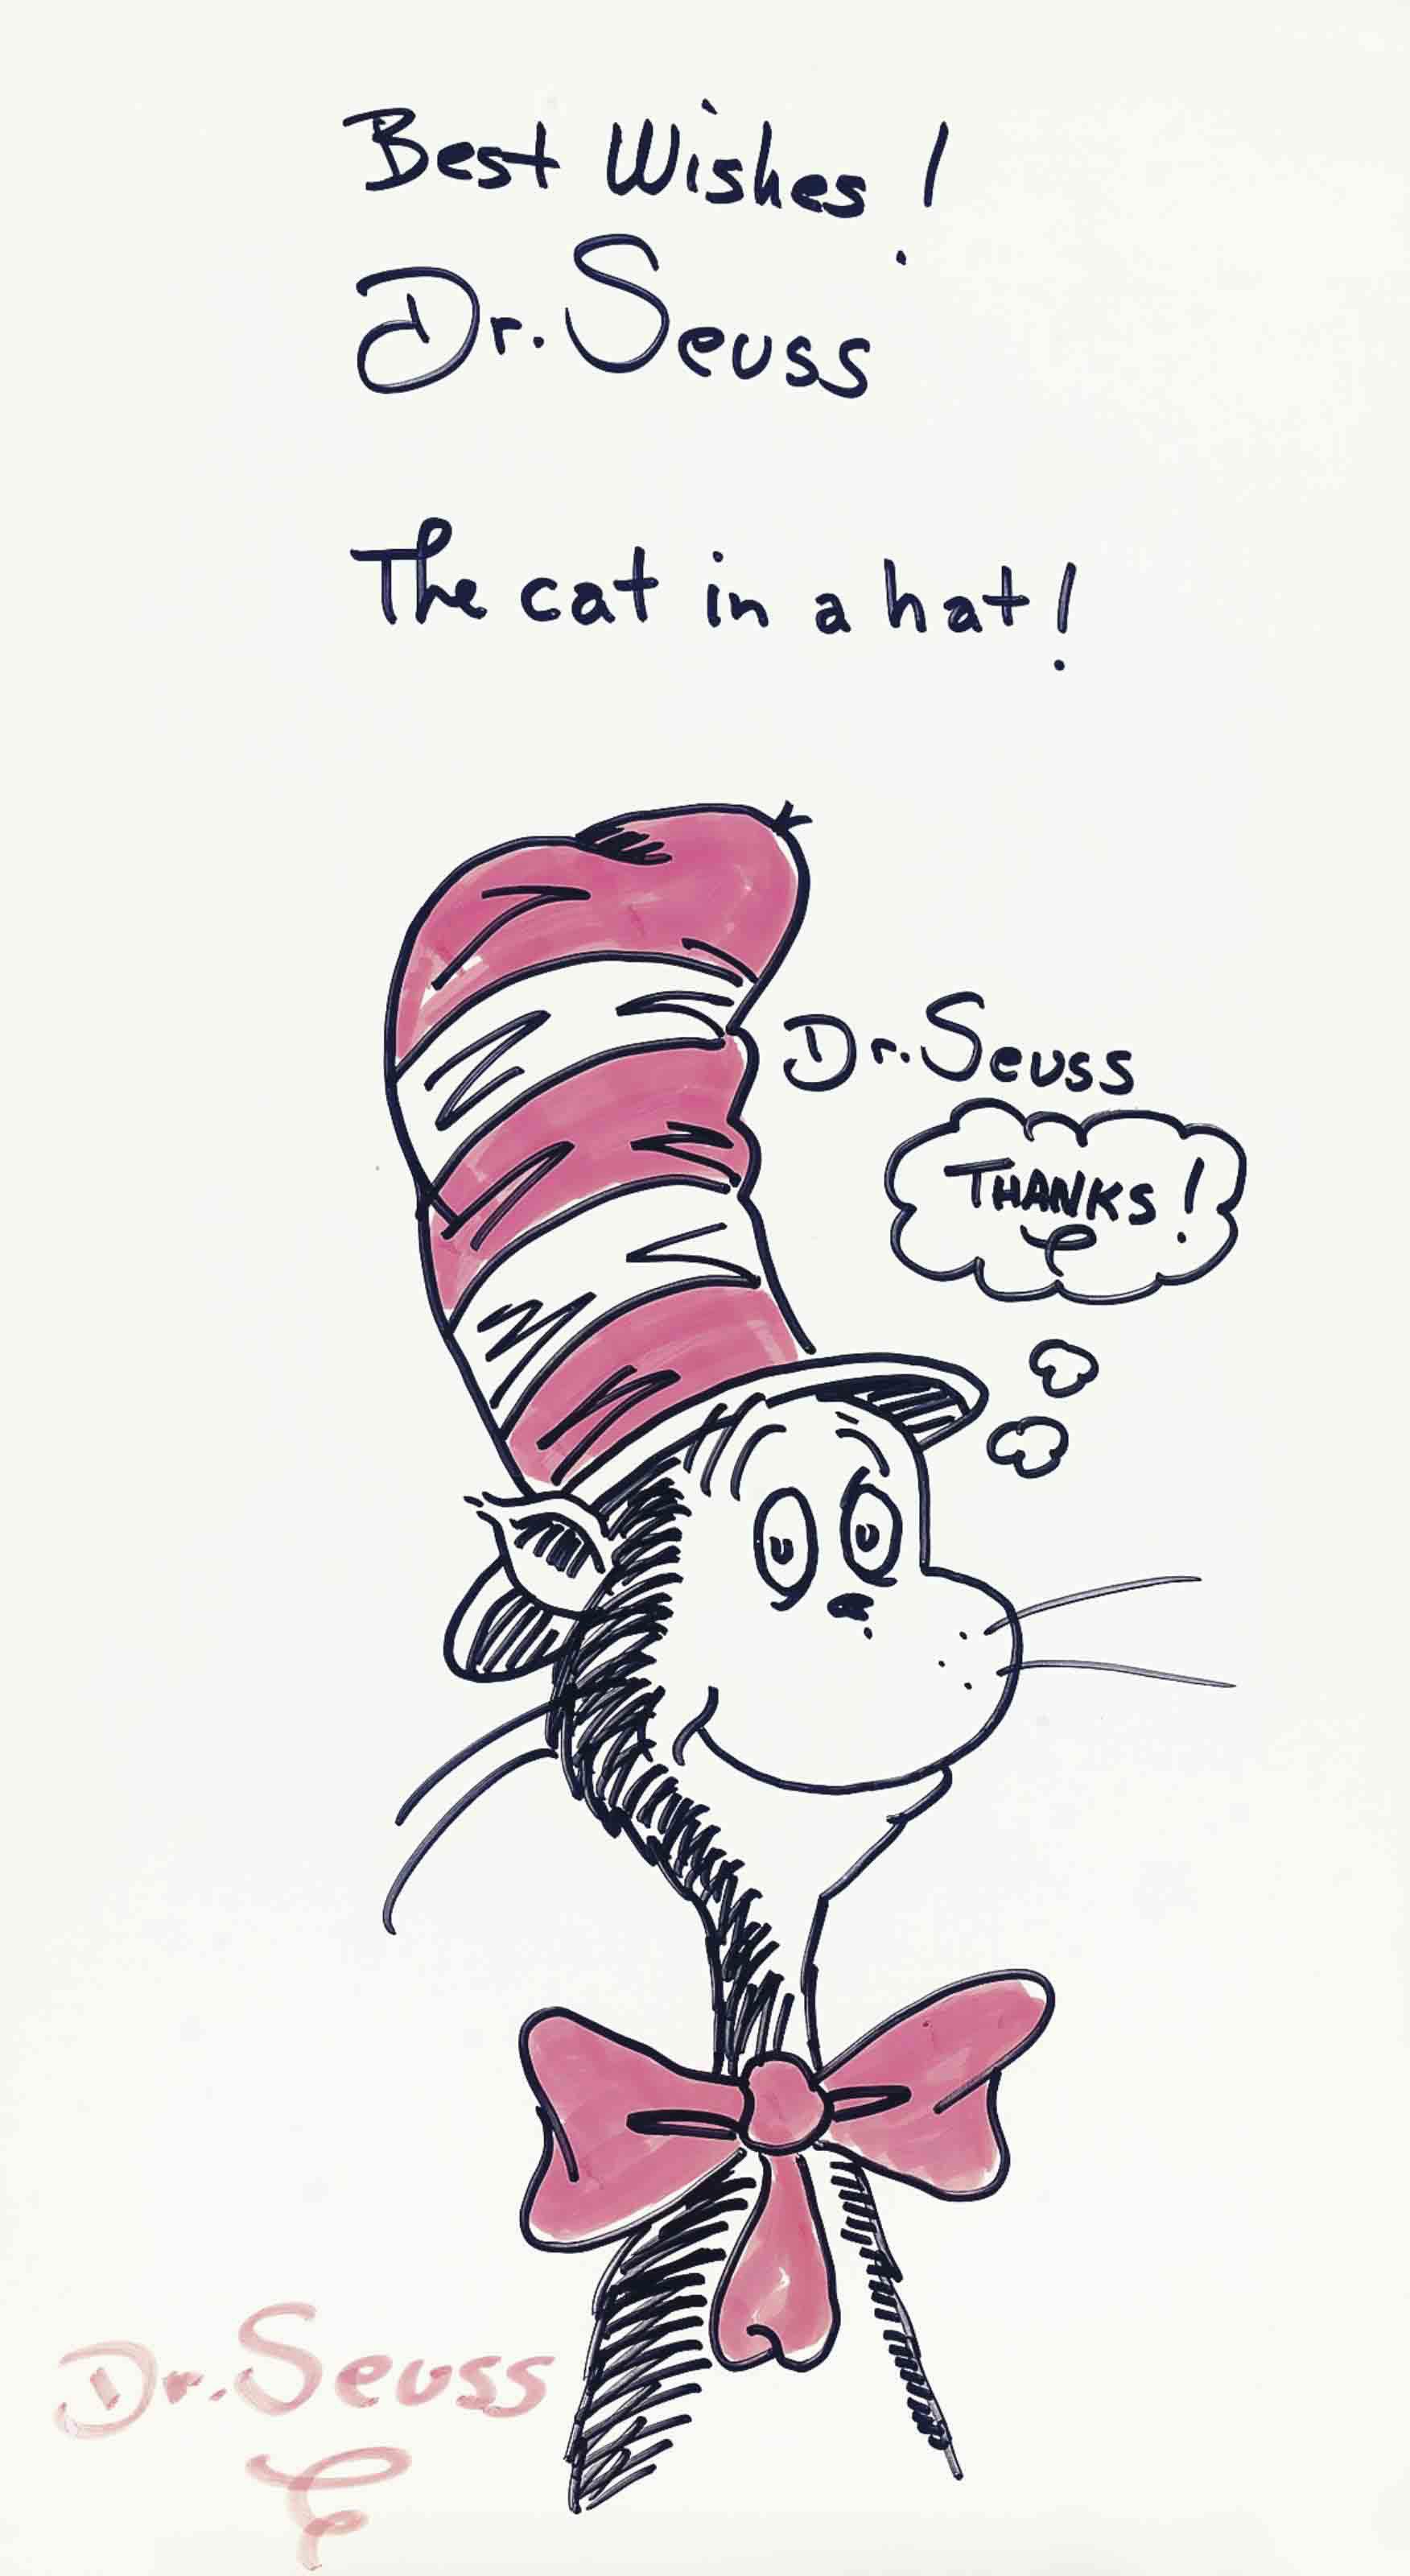 The Cat In A Hat! by Dr. Theodore S. Gisel Seuss | Art.Salon